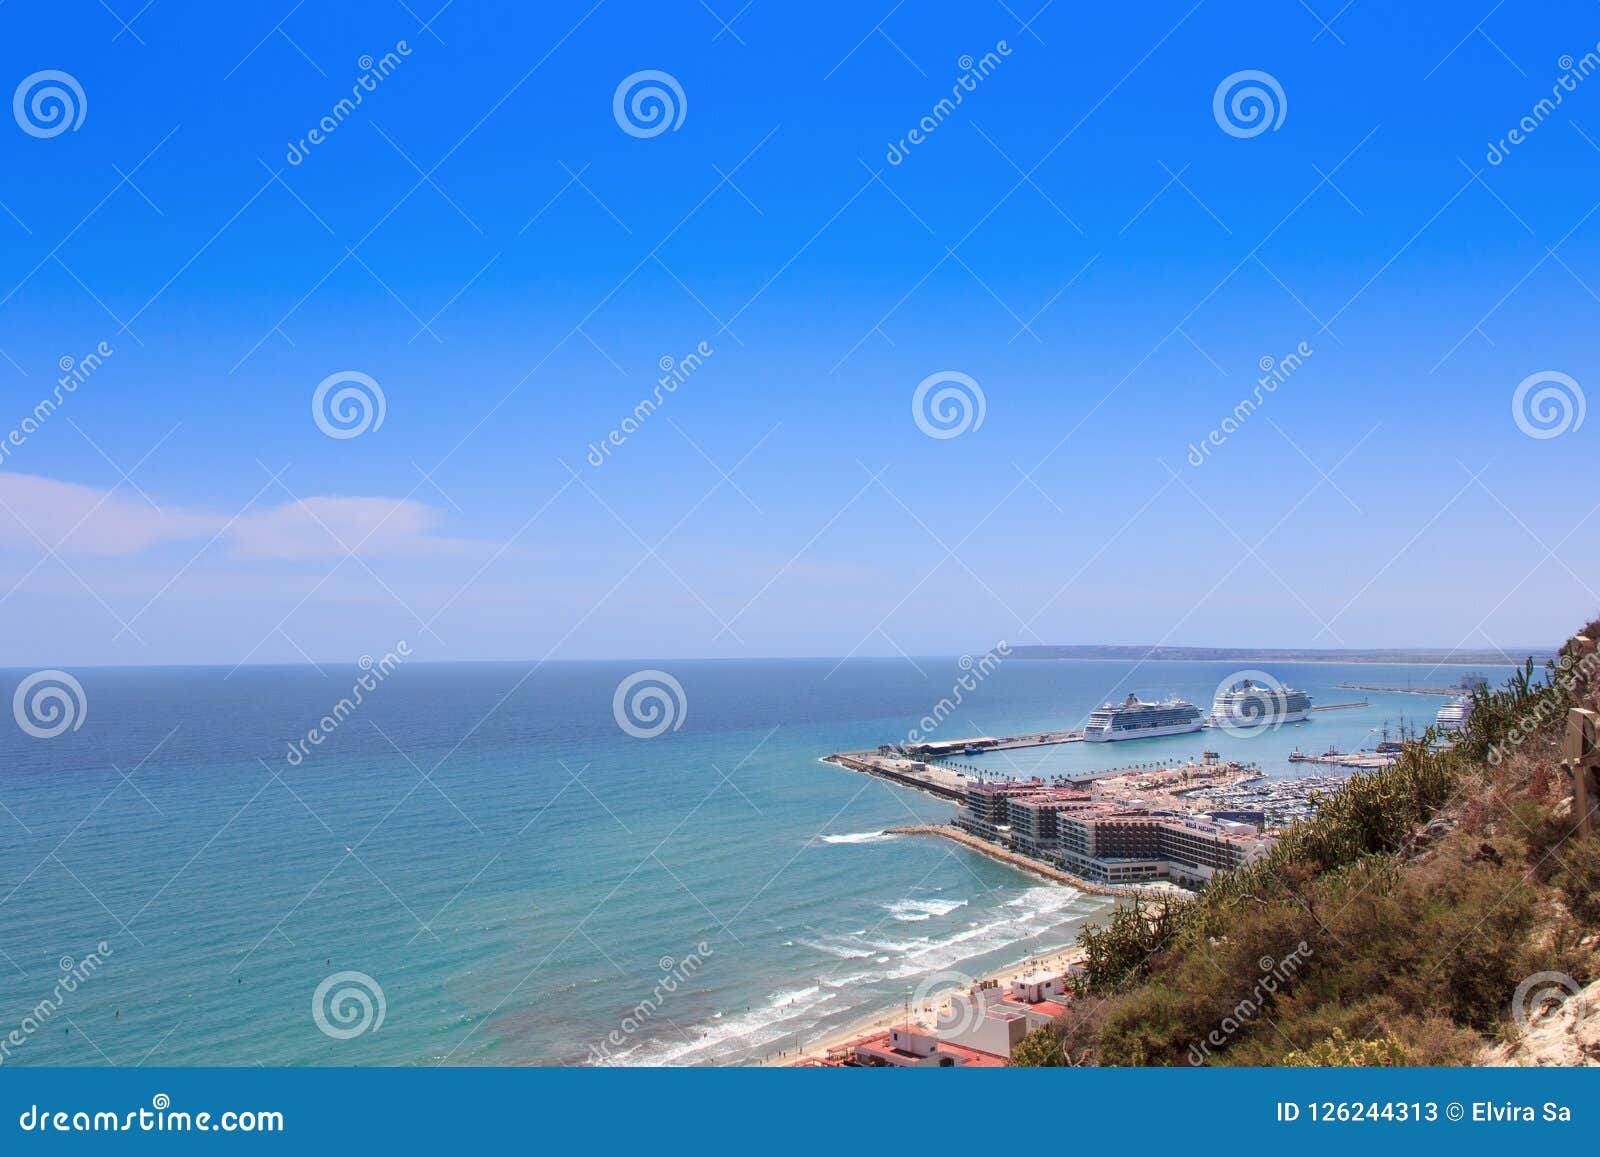 panoramic aerial view at alicante coasline and port, spain